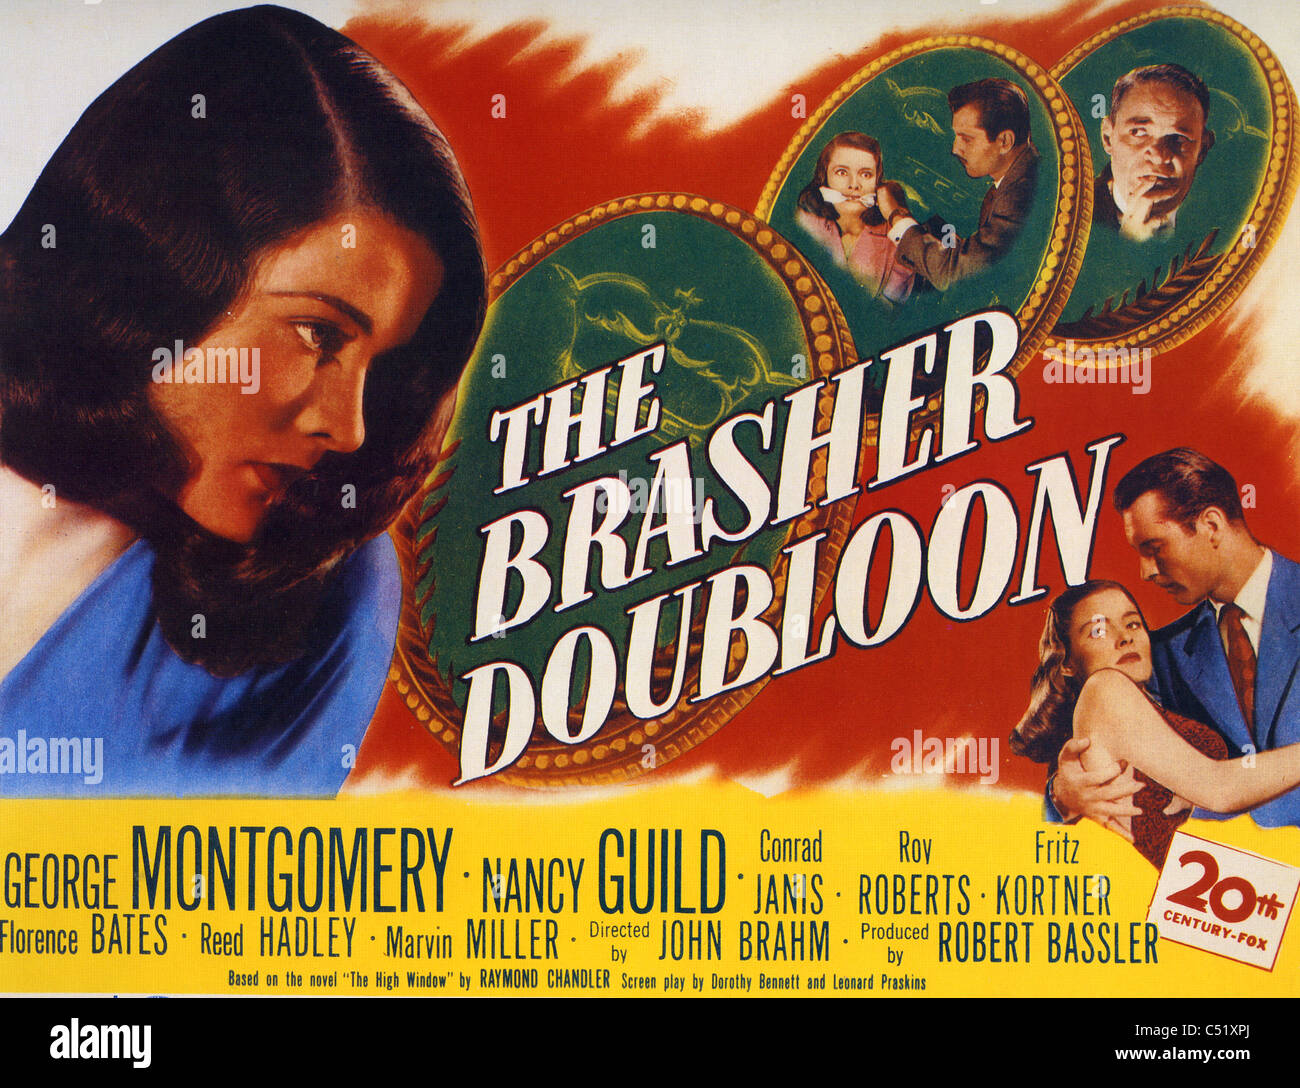 THE BRASHER DOUBLOON 1947 TCF film with George Montgomery and Nancy Guild based on book by Raymond Chandler Stock Photo